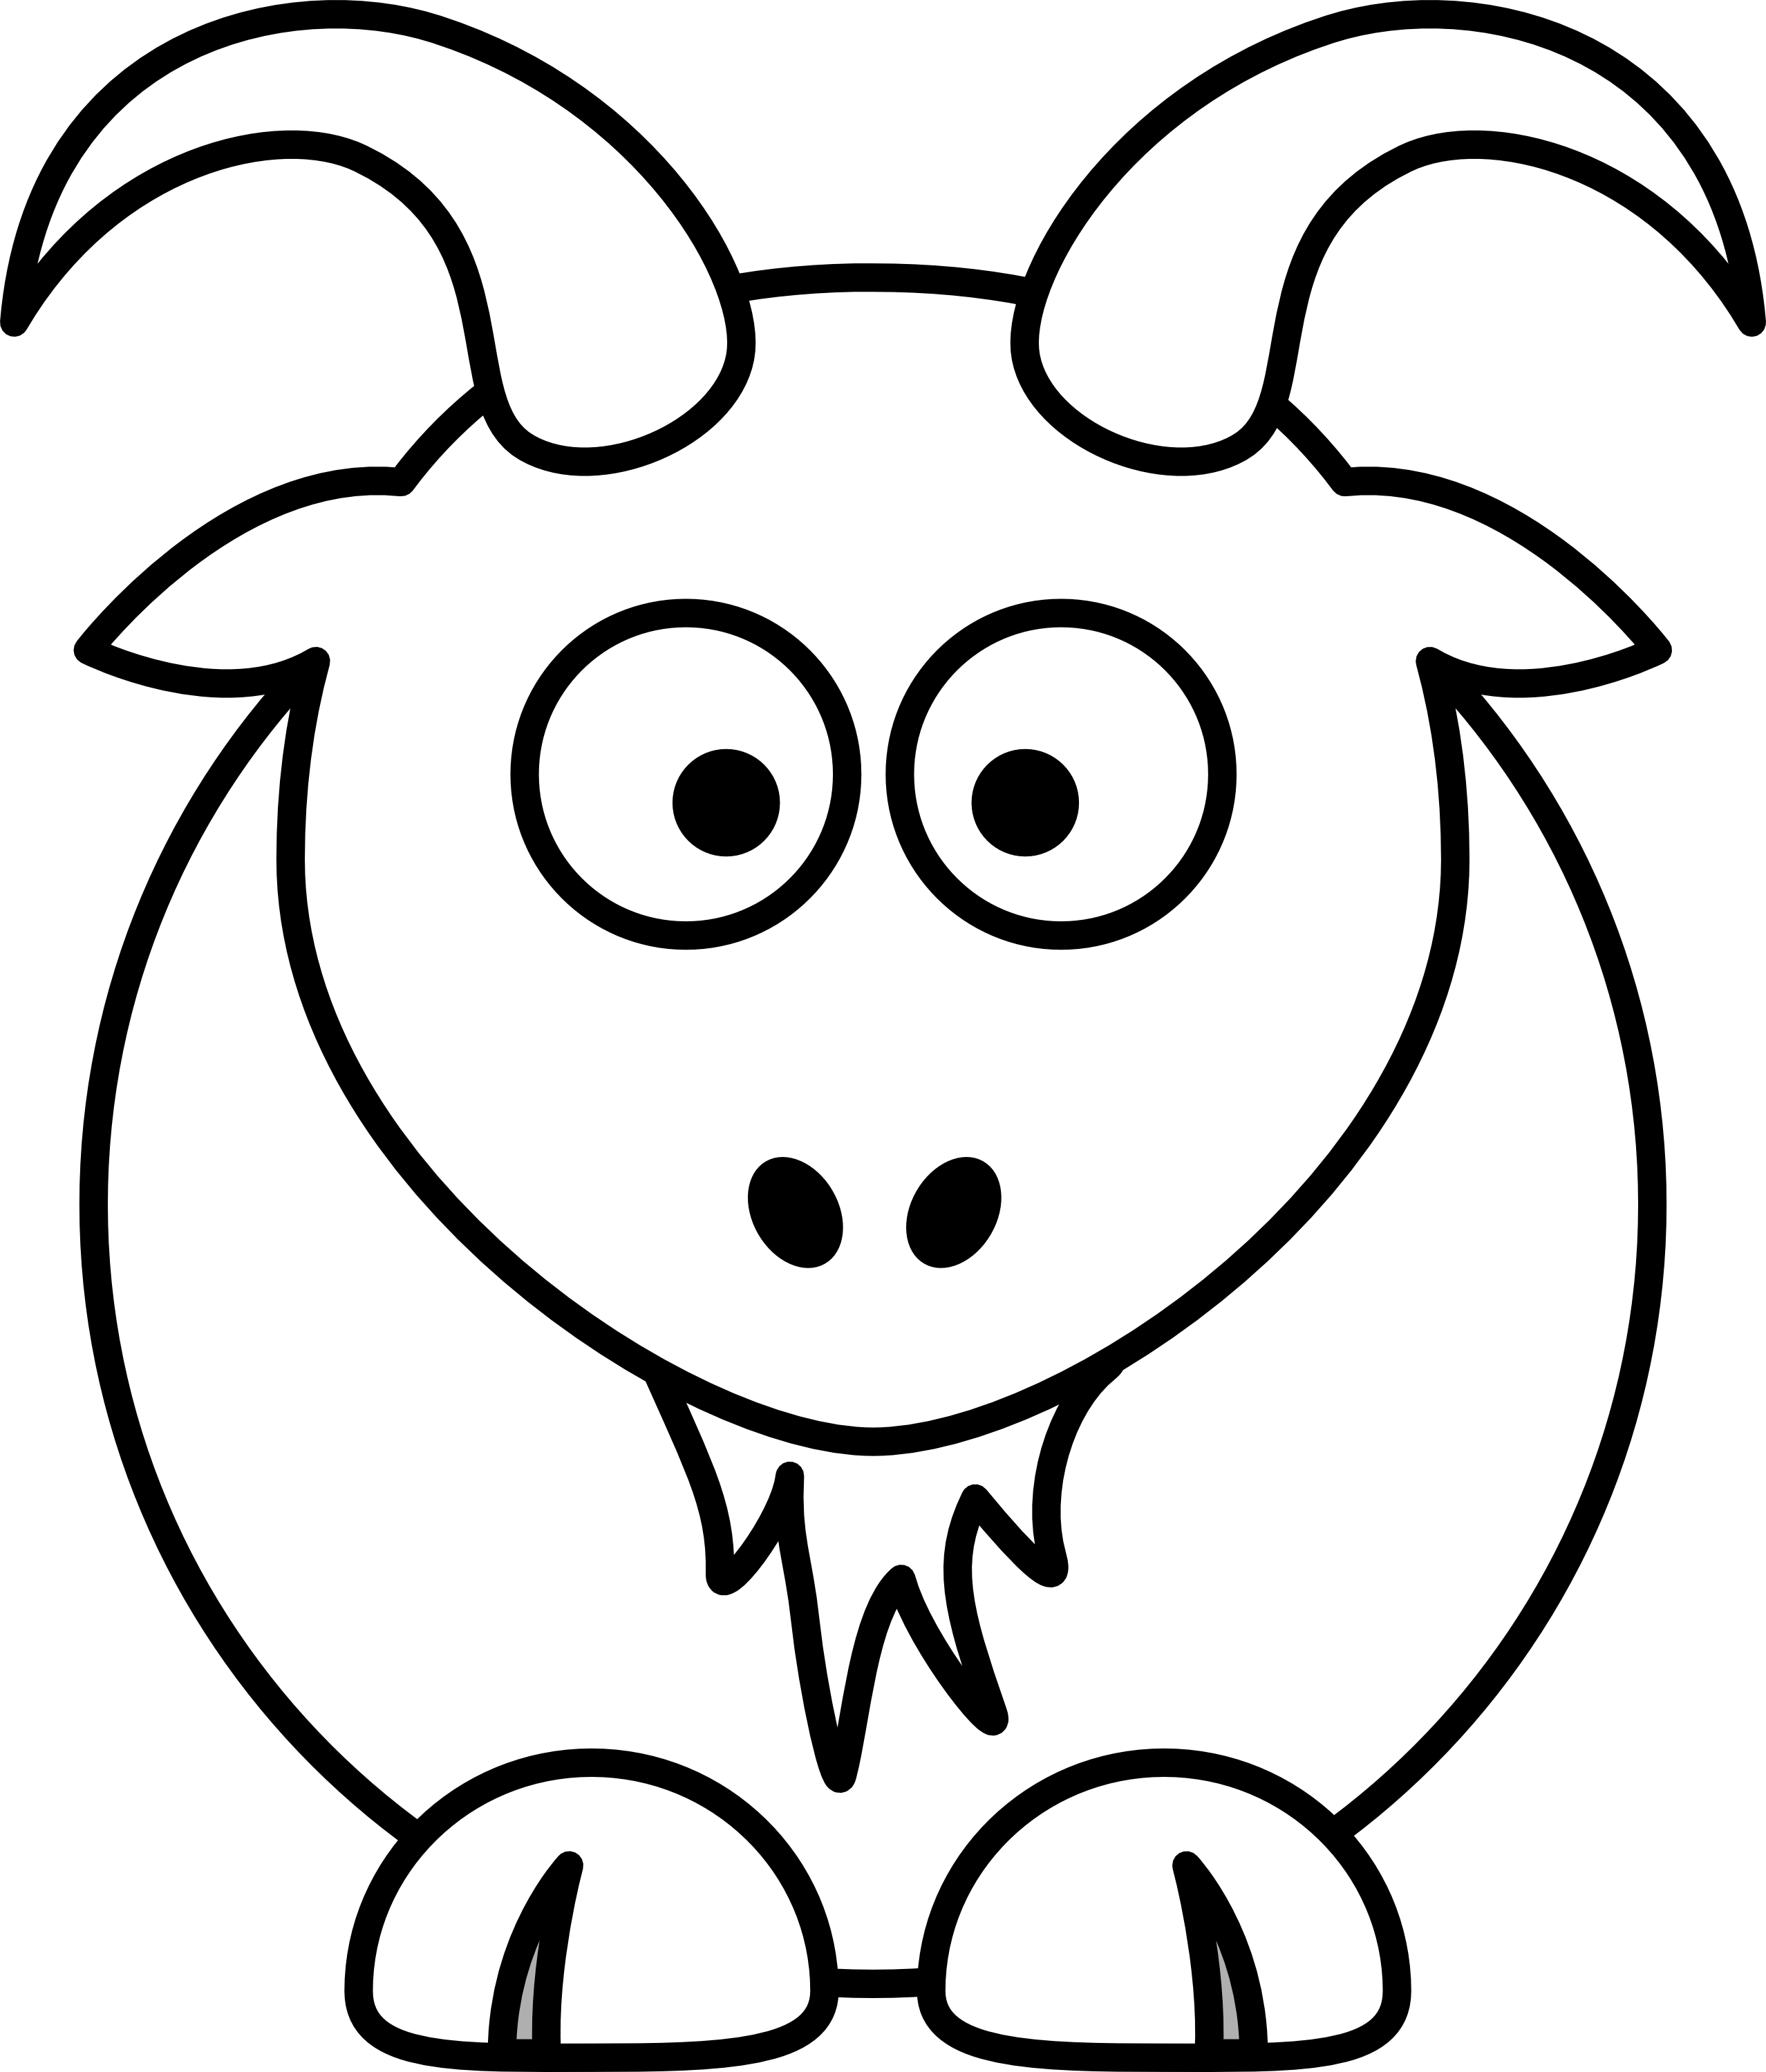 Goat Clipart Free | Clipart Panda - Free Clipart Images